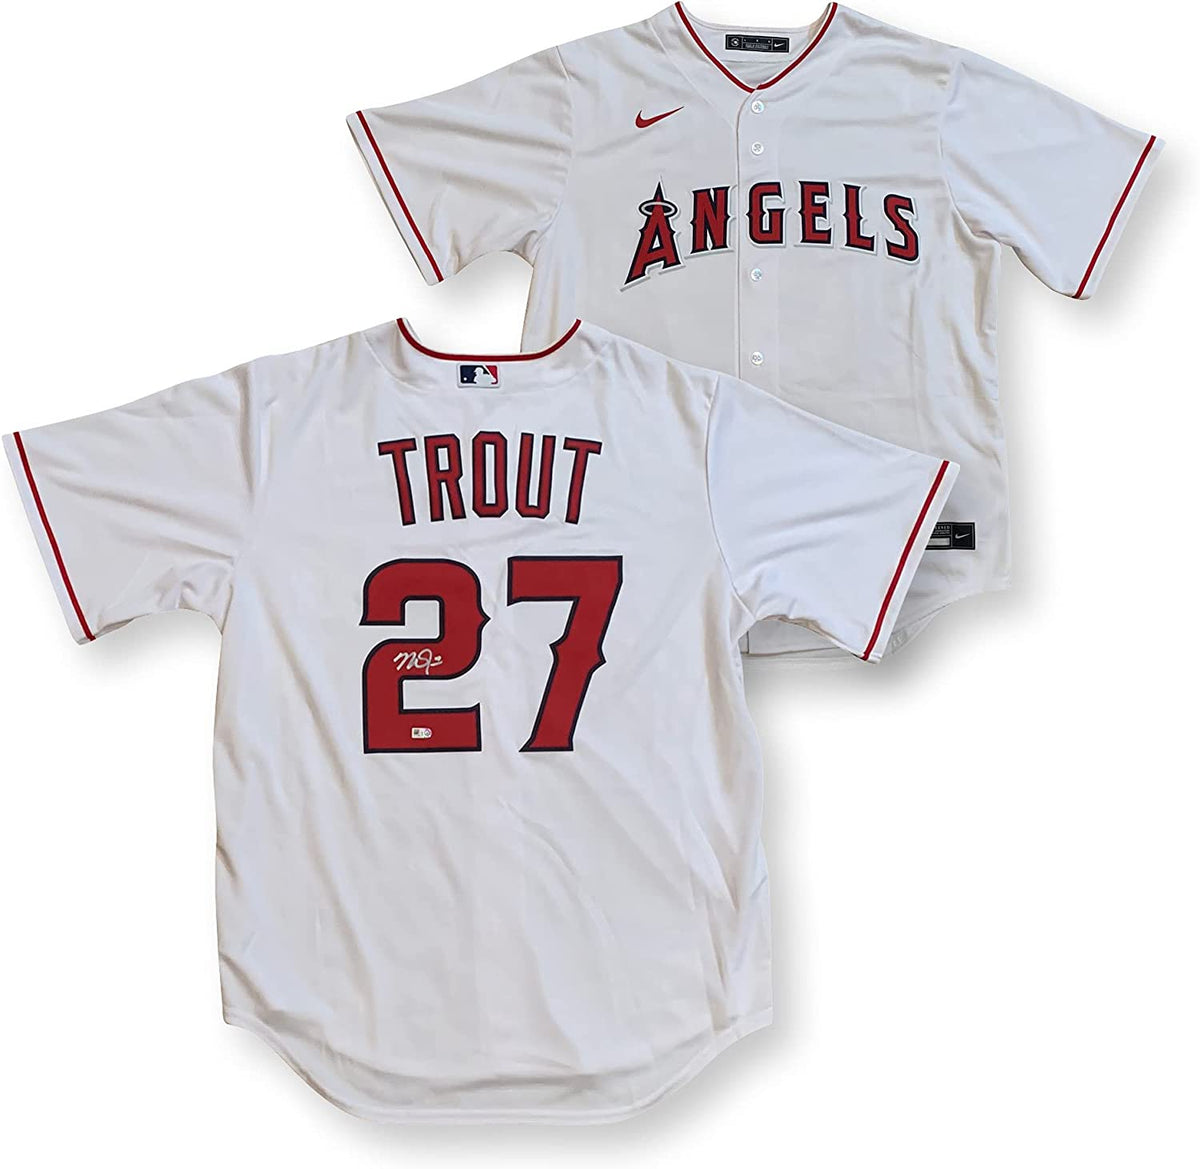 MLAM Mike Trout 2012 Al Roy Autographed Red Authentic Angels Jersey